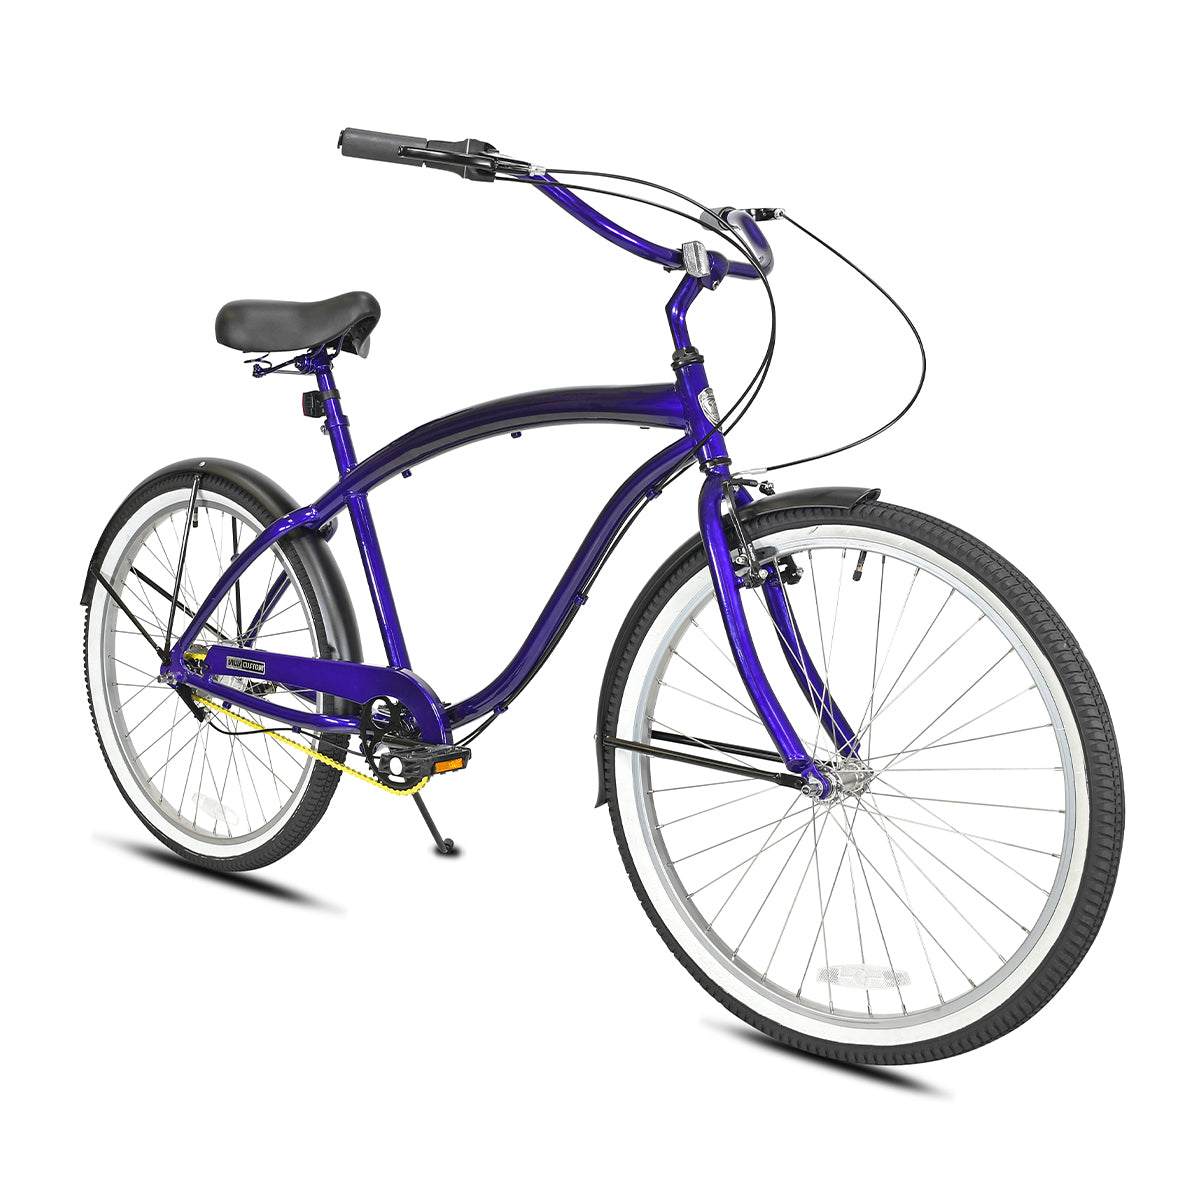 Danny 3-Speed Cruiser Electric Grape and Blue Step-Over Frame with Black Fenders, Saddle, Handlebar, Grips, Tires and Hand Brakes with Silver Wheels and Gold Chain